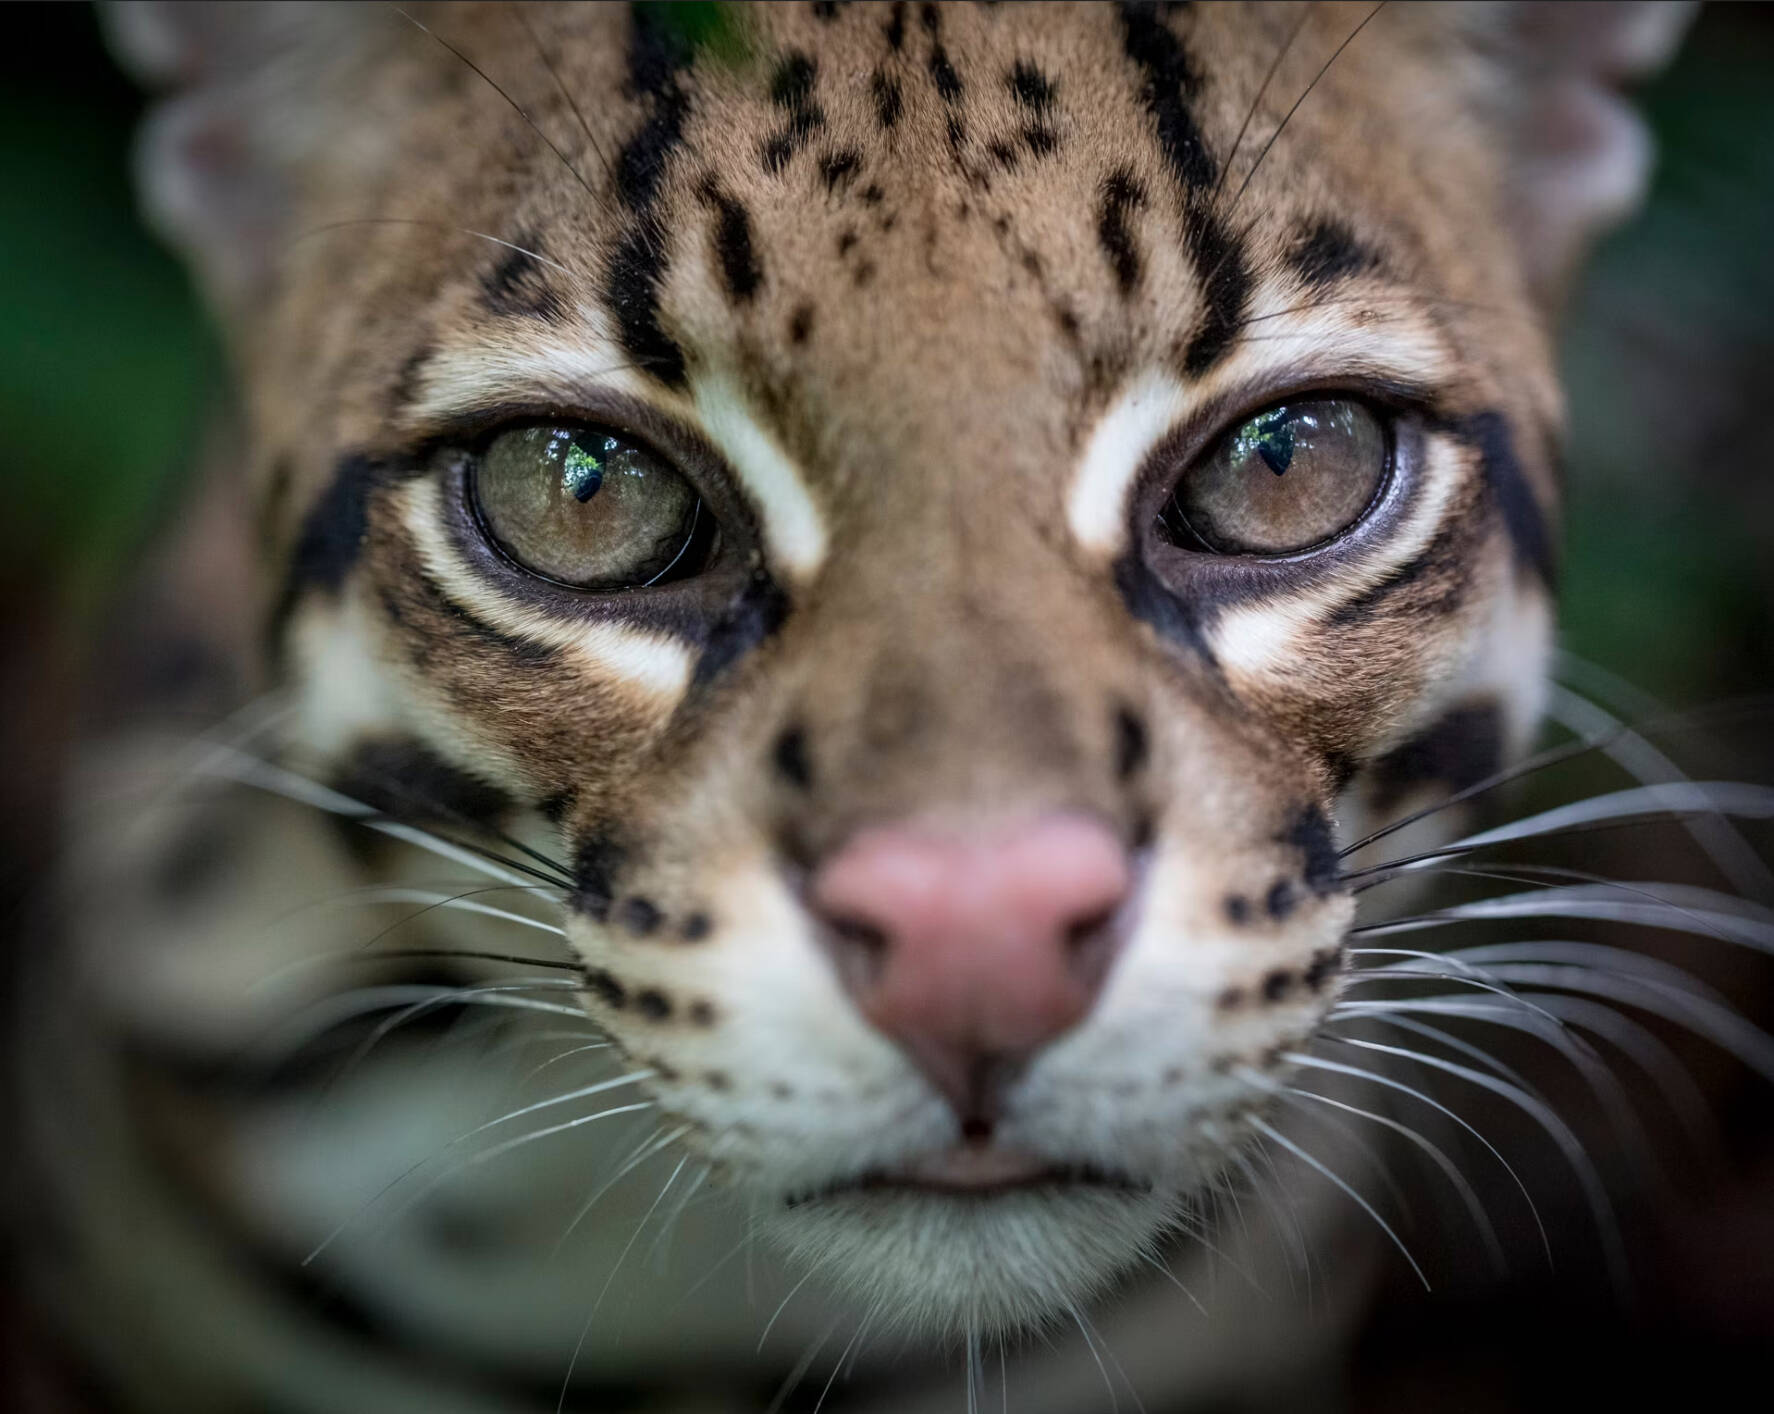 courtesy photo/Prime Video
‘Wildcat’ is a documentary film featuring Bainbridge ecologist Samantha Zwicker’s conservation and animal rewilding work in the Peruvian Amazon. It debuts in December.